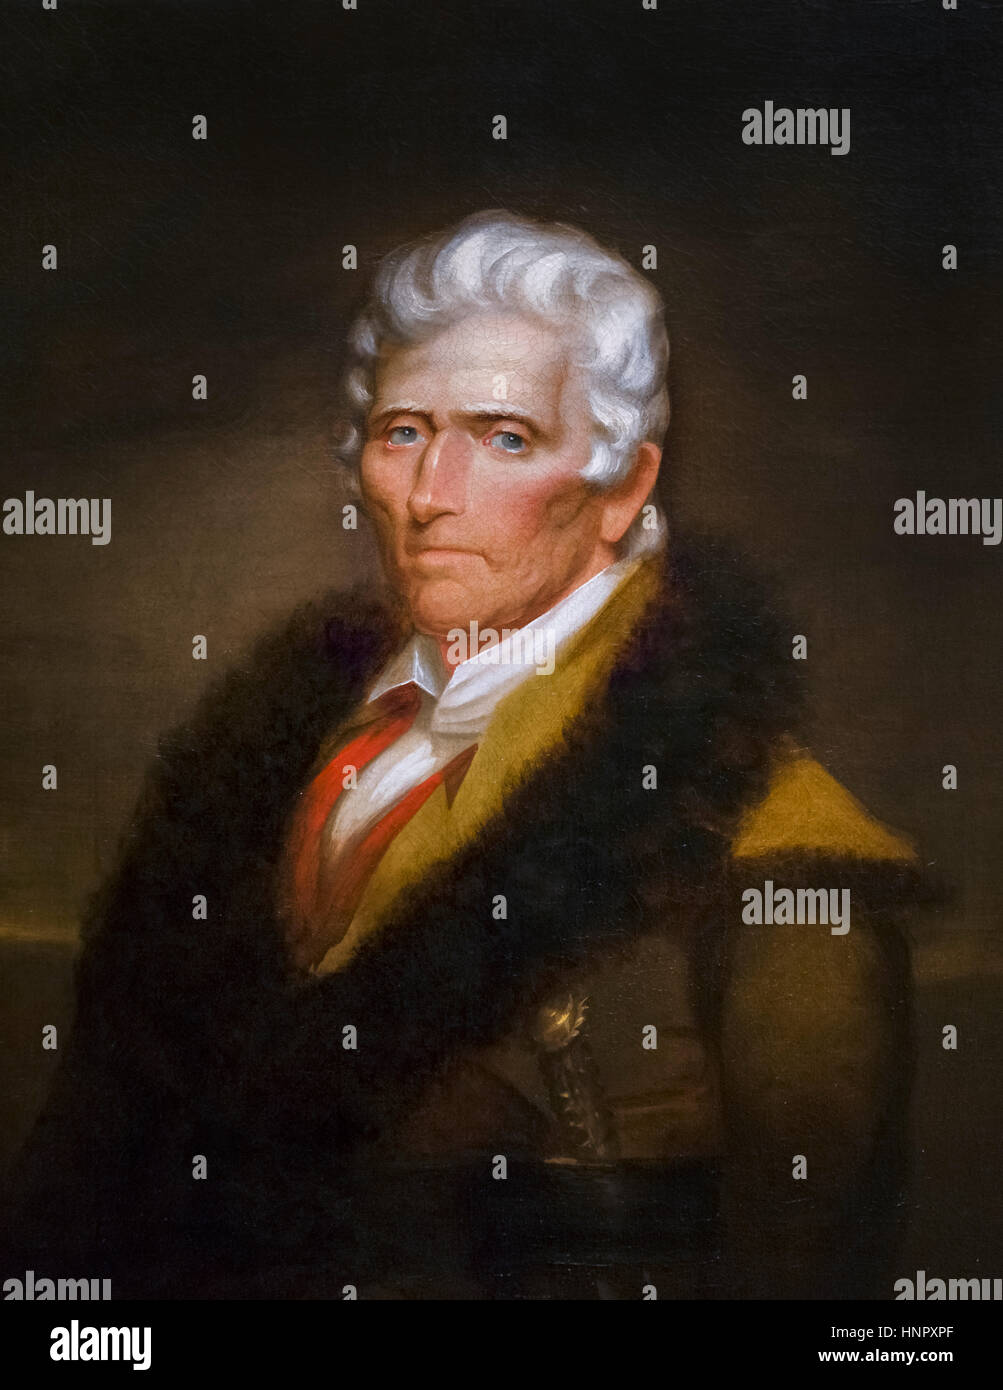 Daniel Boone (1734-1820), portrait by Chester Harding, oil on canvas, 1820. Daniel Boone was a famous American pioneer and frontiersman who became a folk hero in the United States Stock Photo